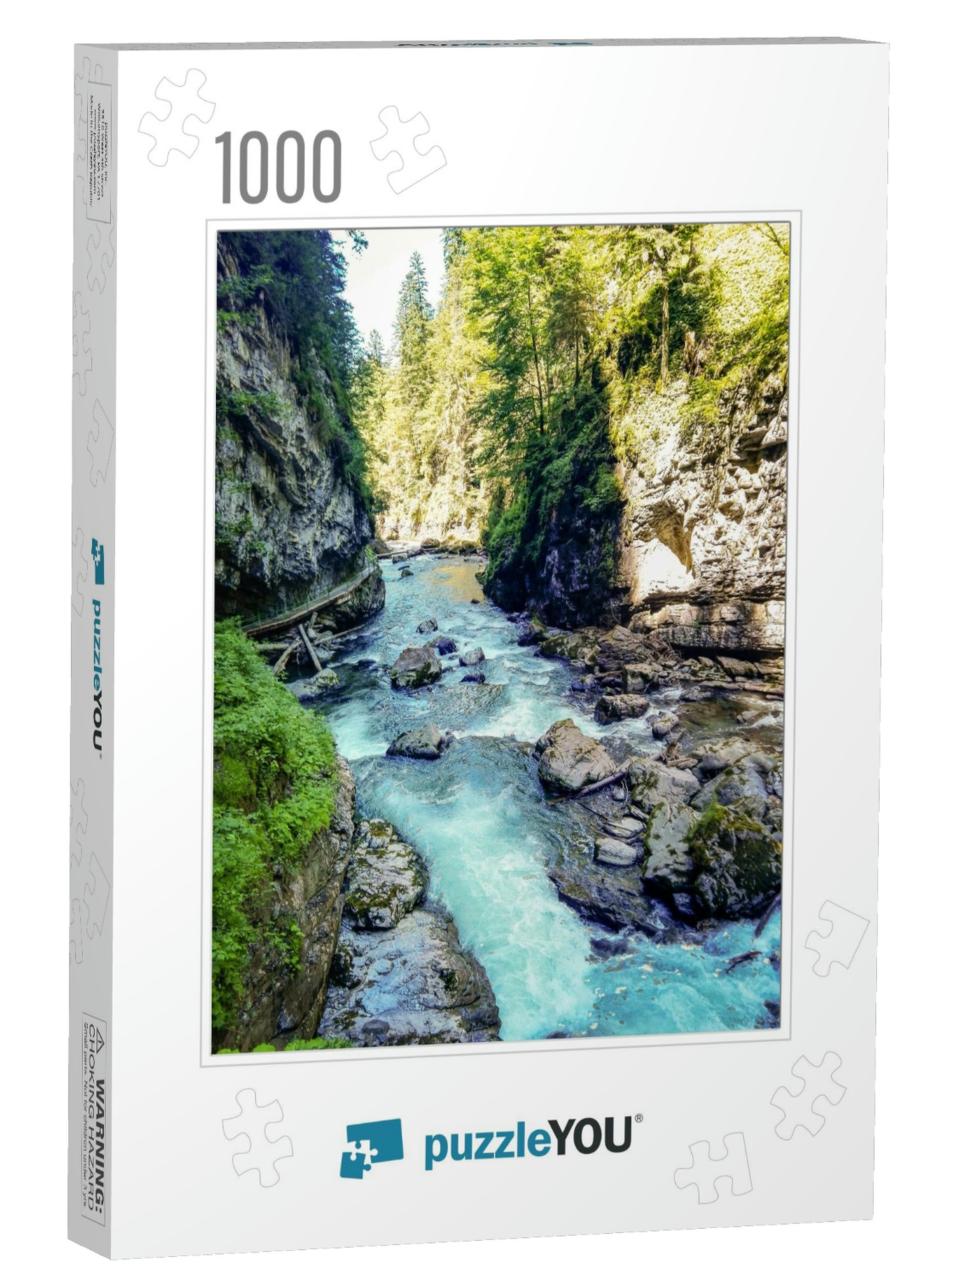 Breitachklamm is a Very Popular Canyon in Bayaria, German... Jigsaw Puzzle with 1000 pieces